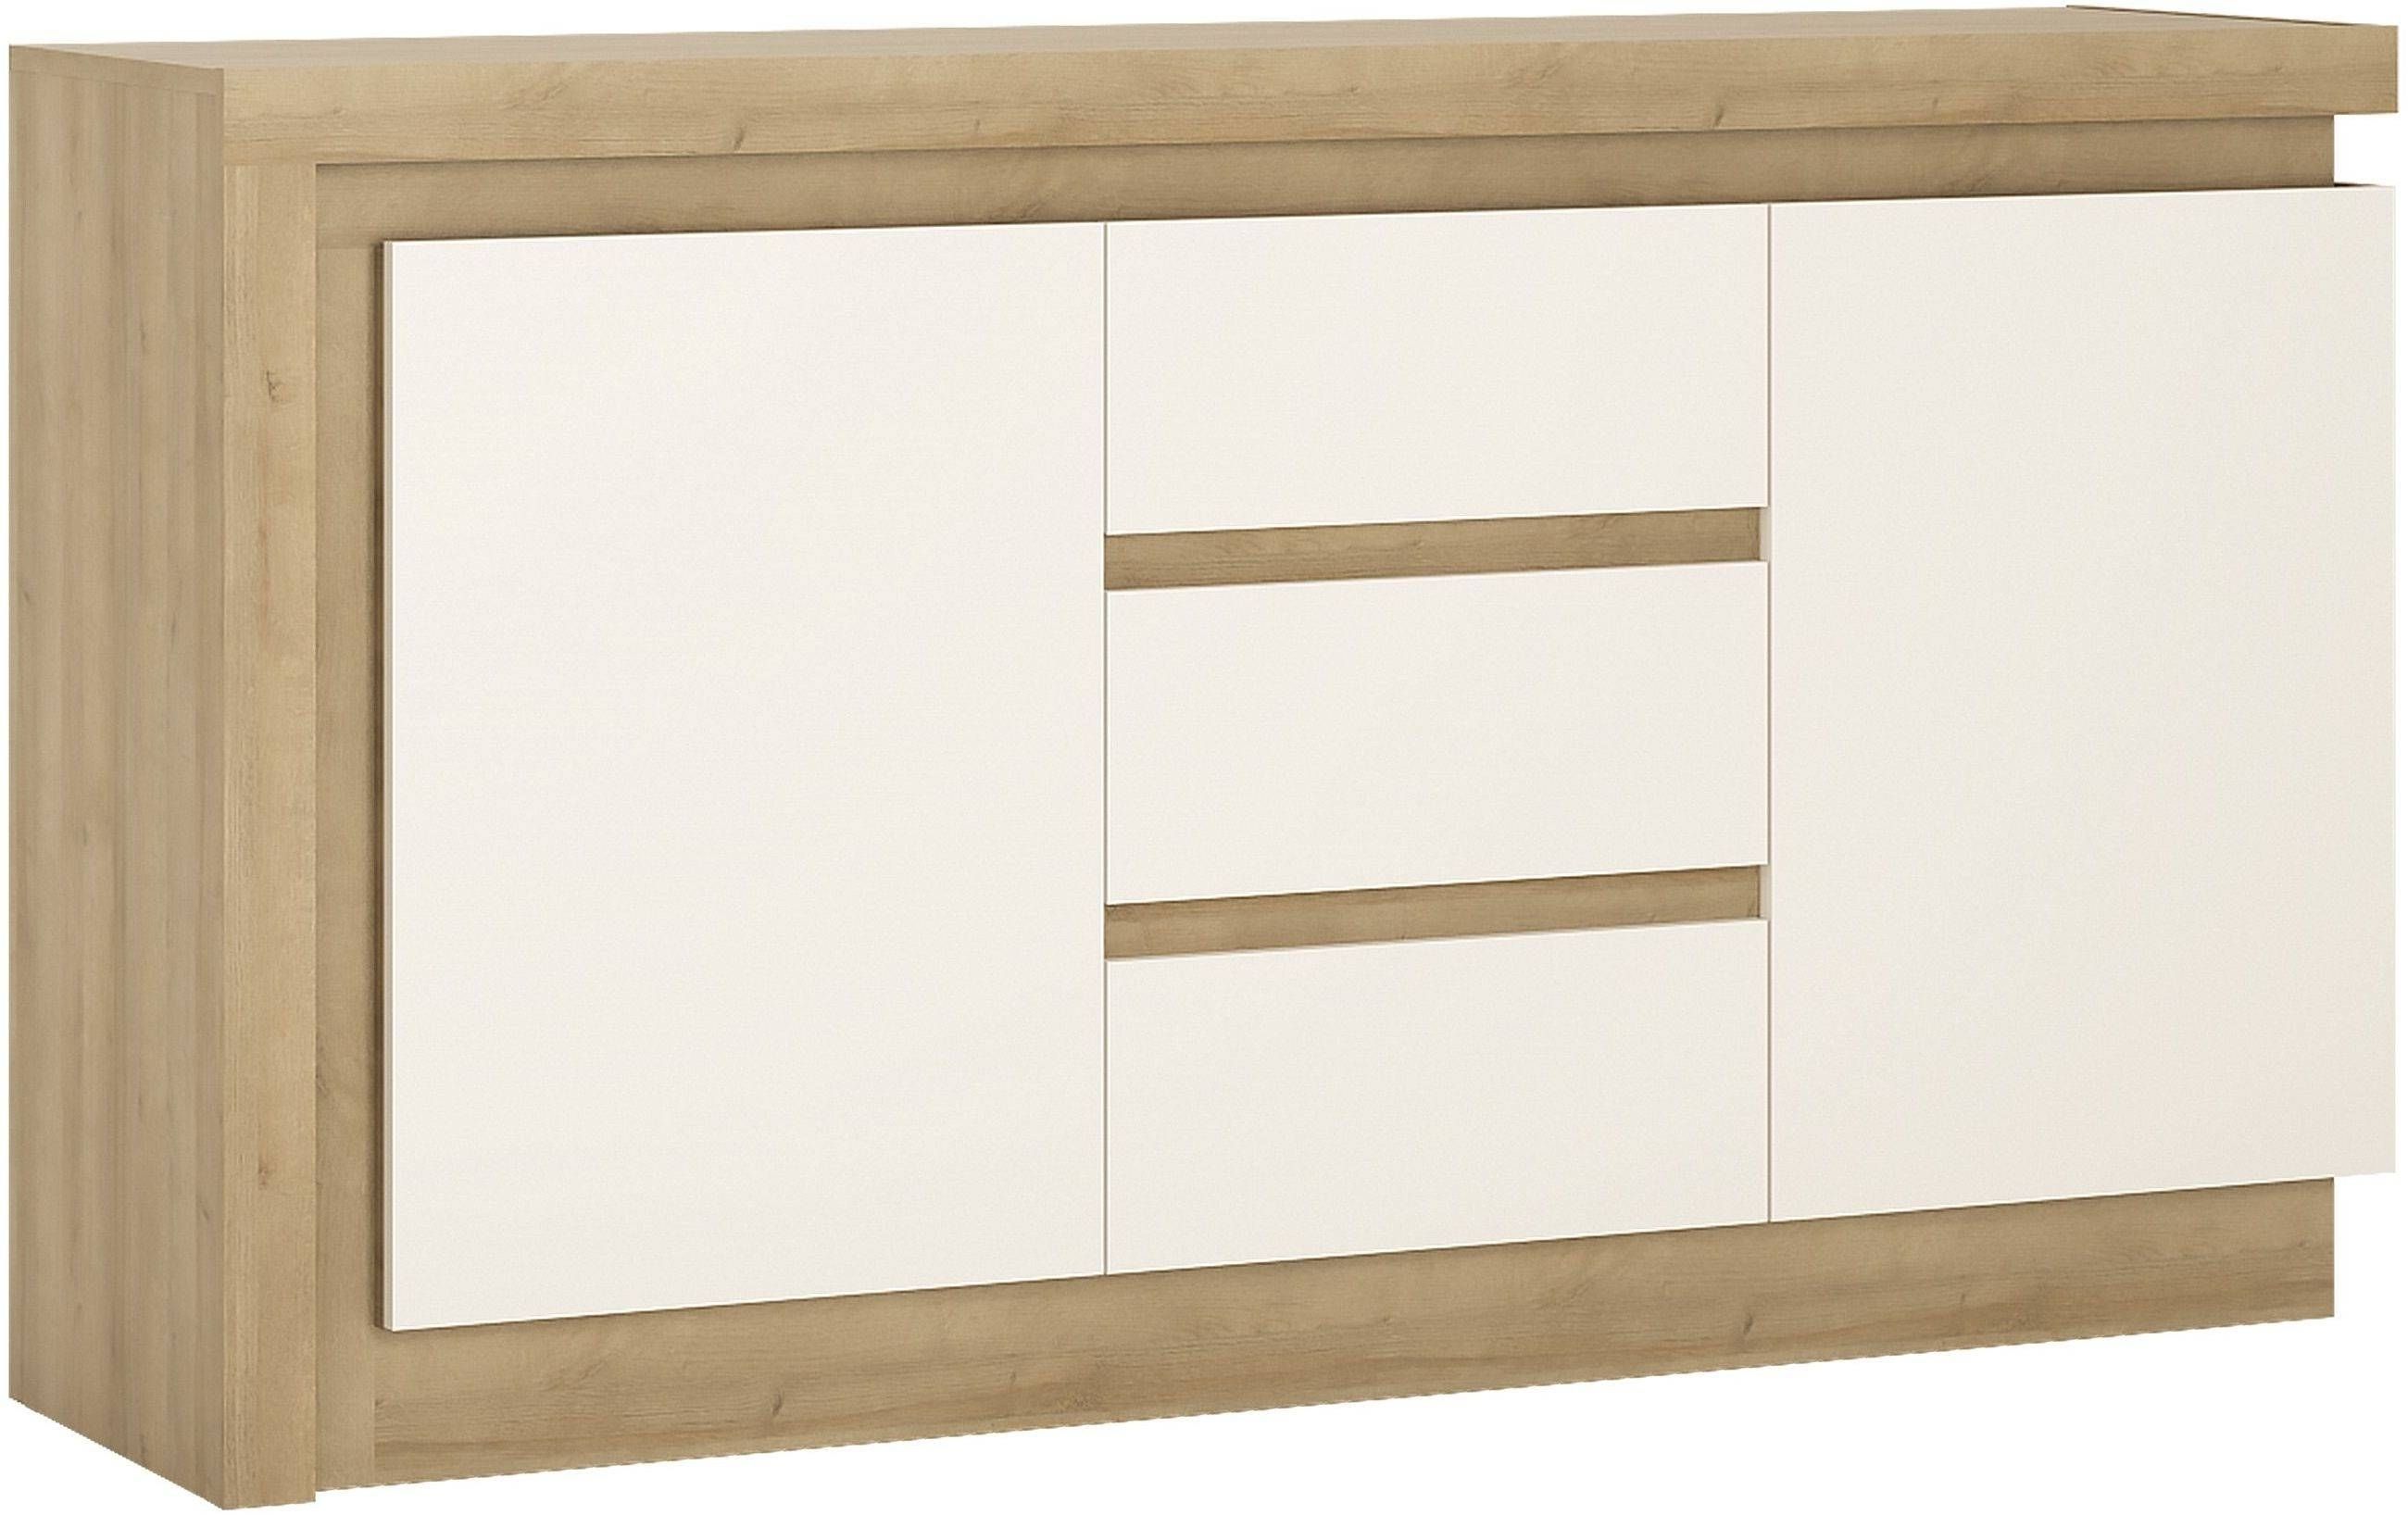 Buy Lyon Riviera Oak And White High Gloss Sideboard – 2 Door 3 Throughout High Gloss Sideboards (Photo 3 of 20)